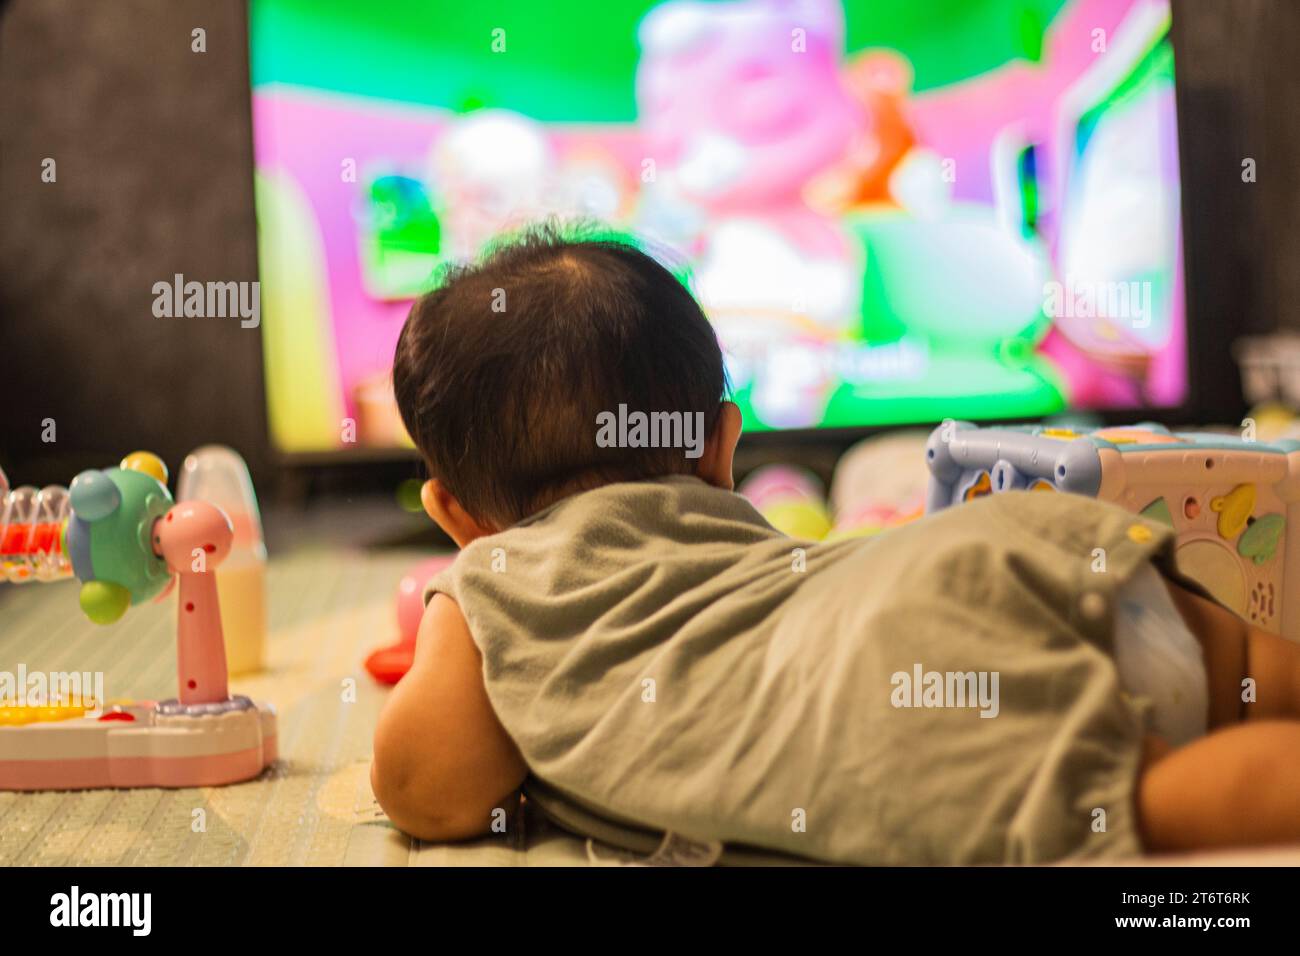 Baby Looking Television In Bedroom, background for advertisement and wallpaper in relaxation corner and home scene. Actual images in decorating ideas Stock Photo